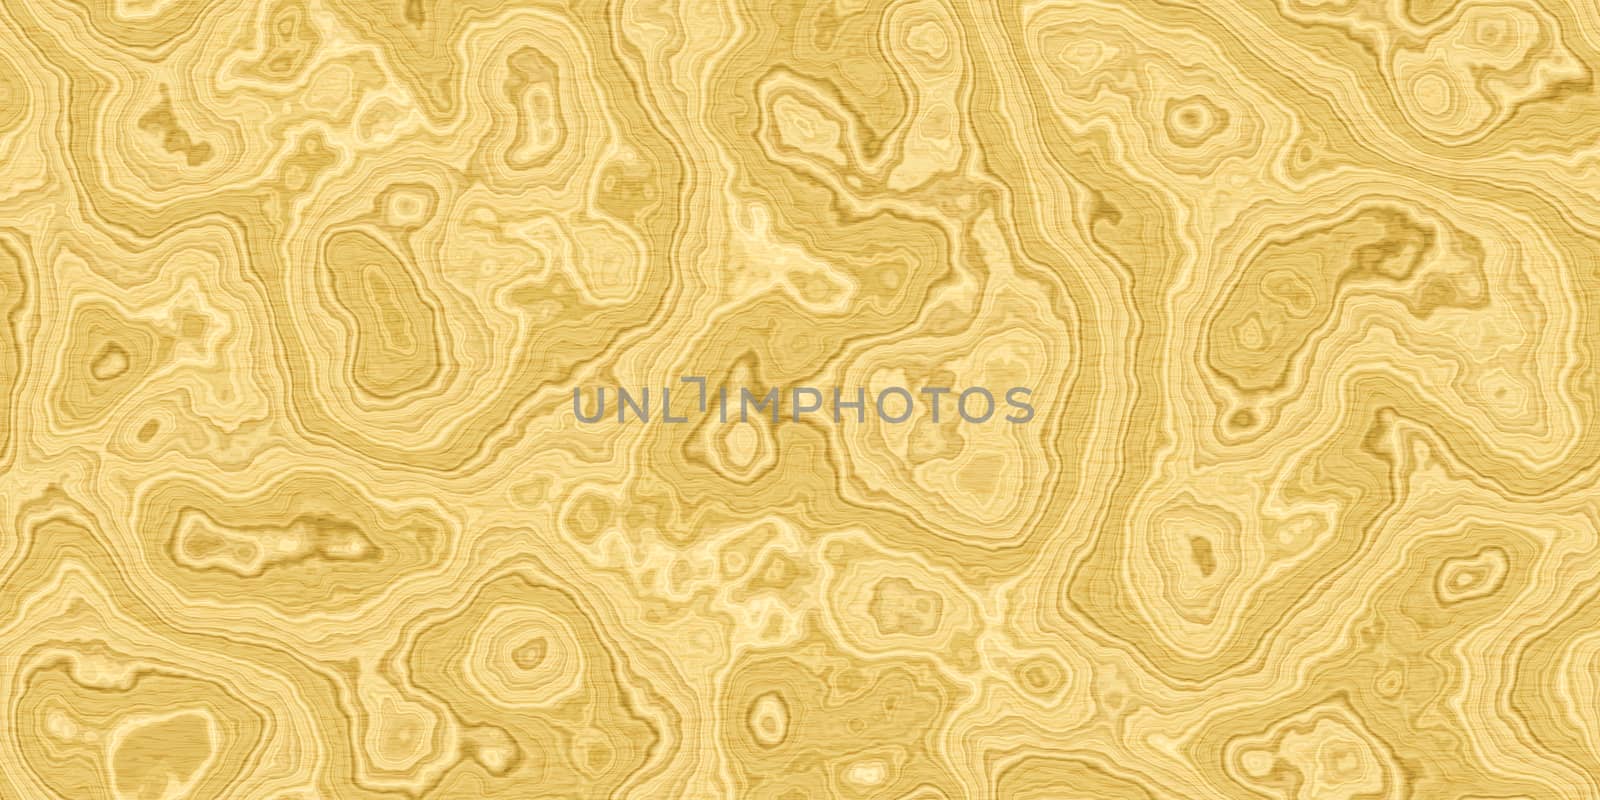 Ash wood surface seamless texture. Ash wooden board panel background. Origin root tree fibers direction